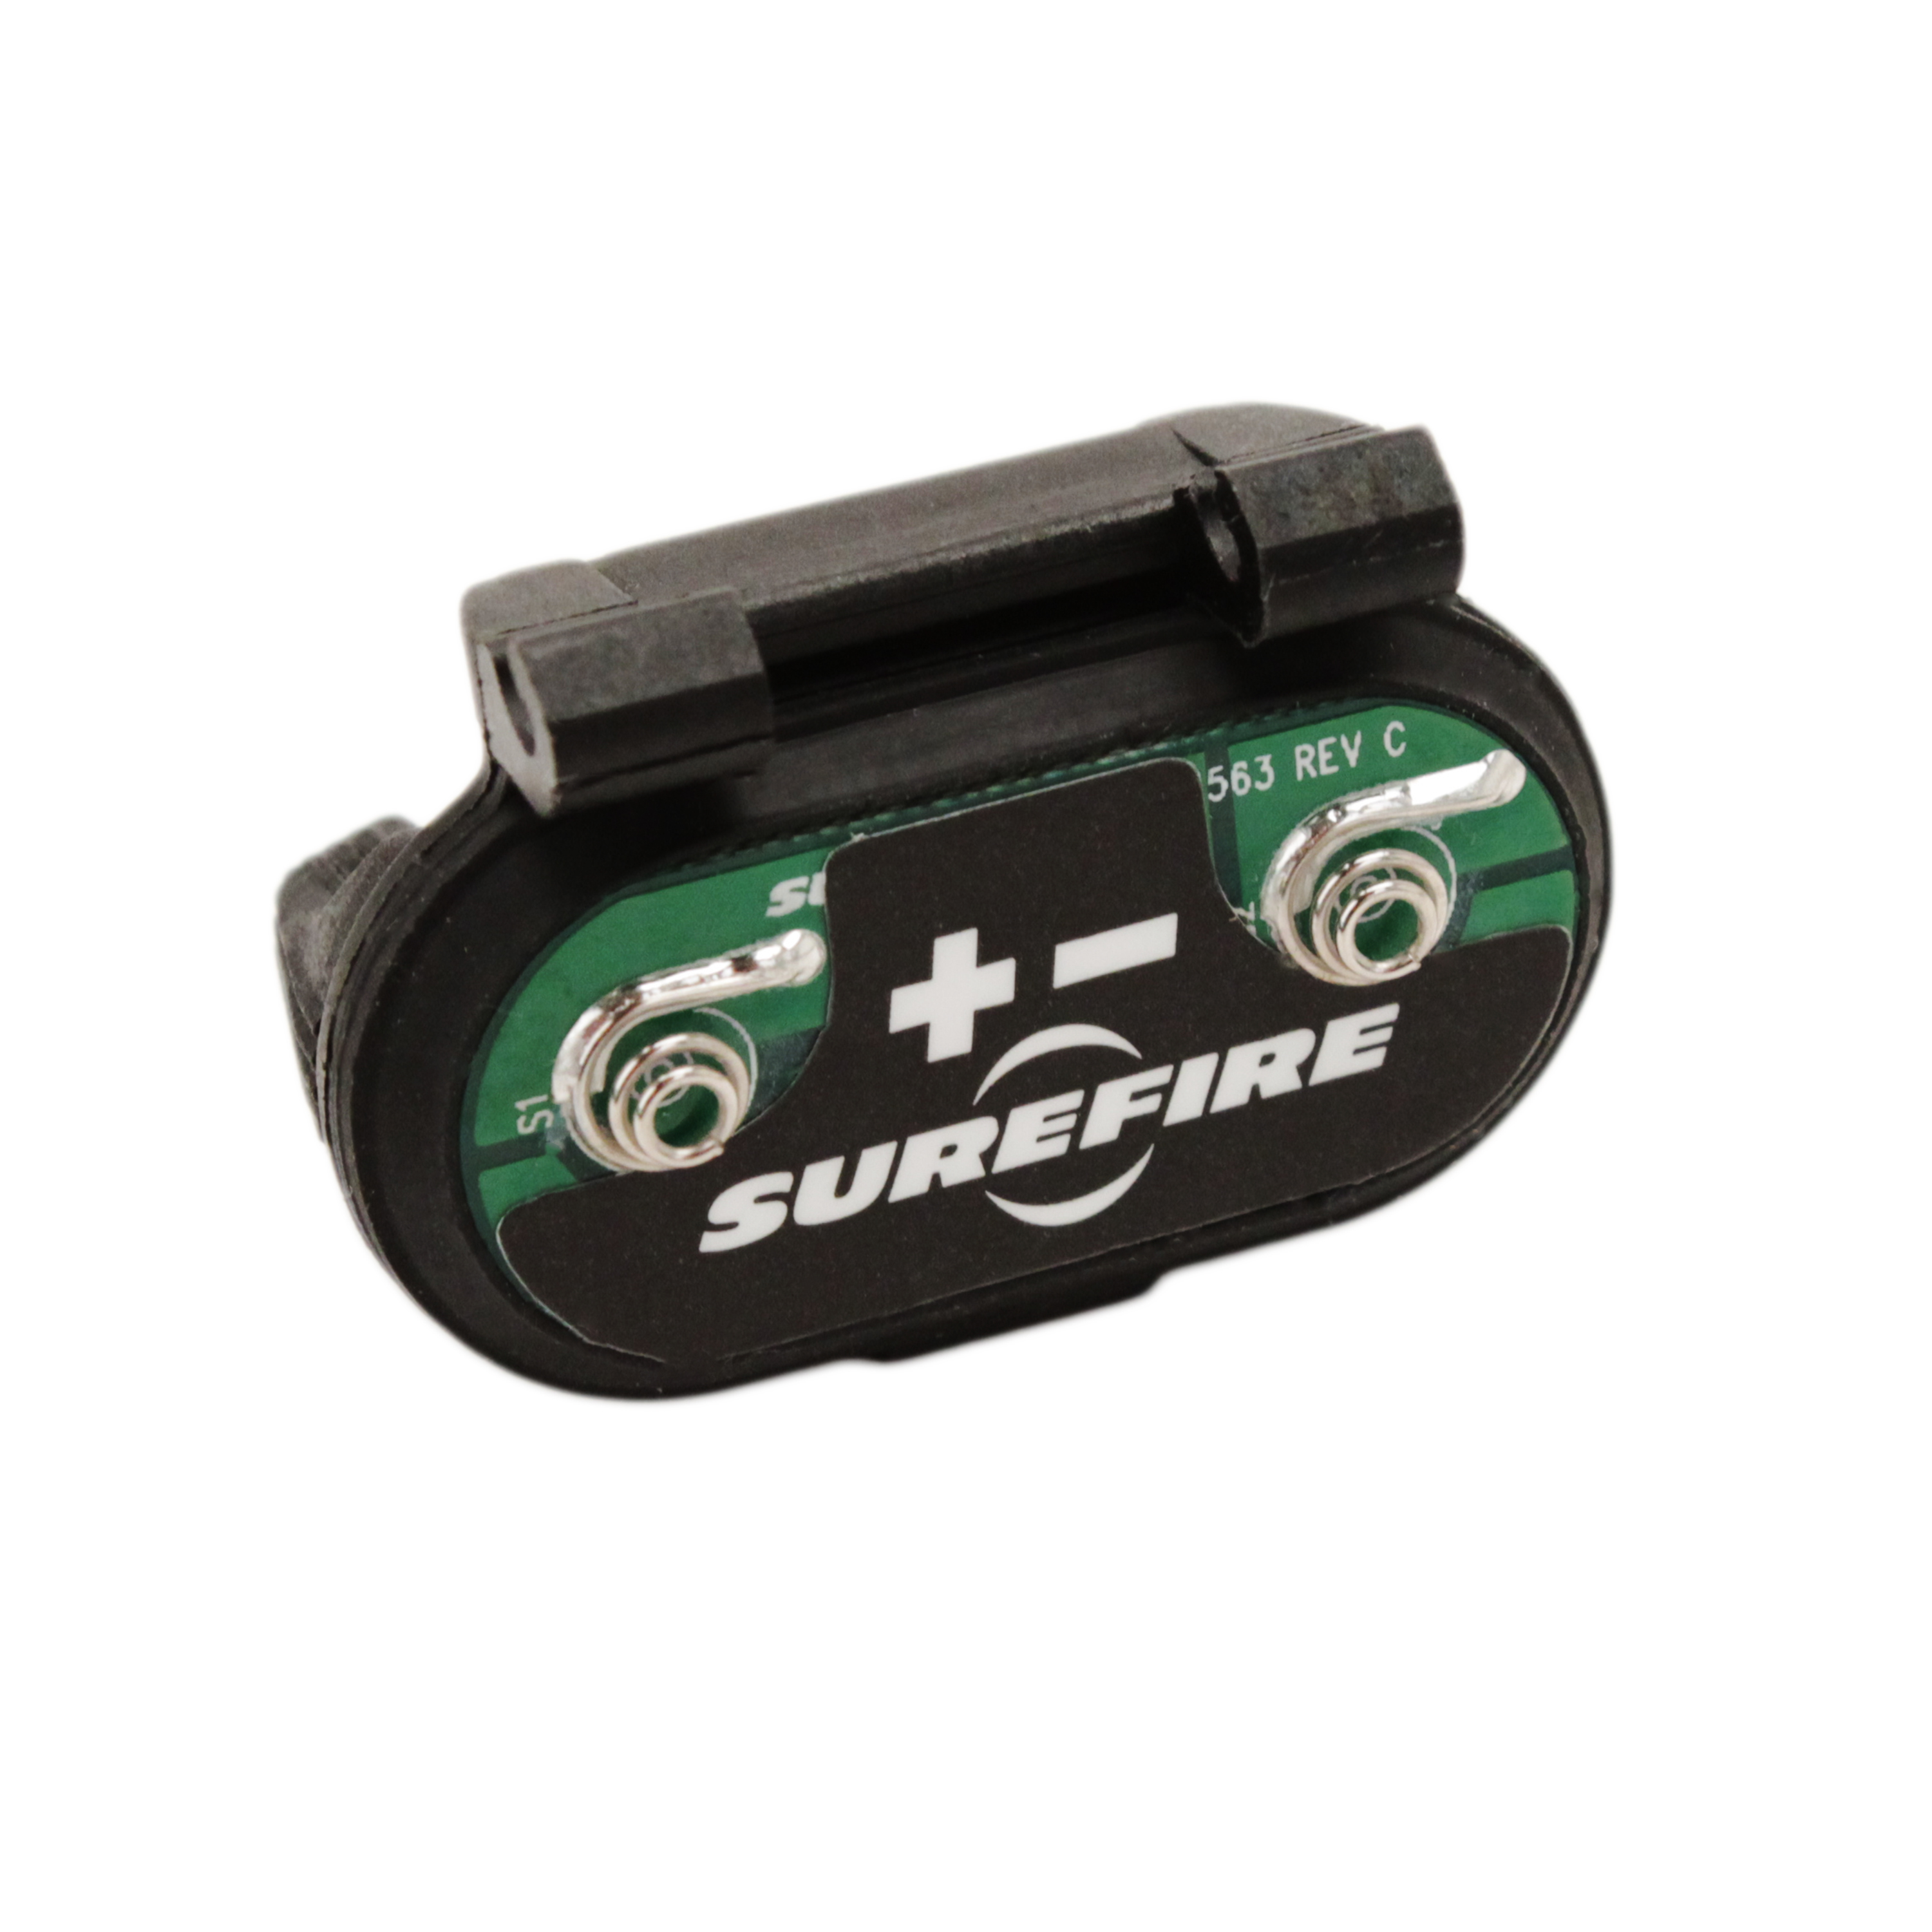 SureFire X300 LED Weaponlight Tailcap | $2.01 Off 4 Star Rating 